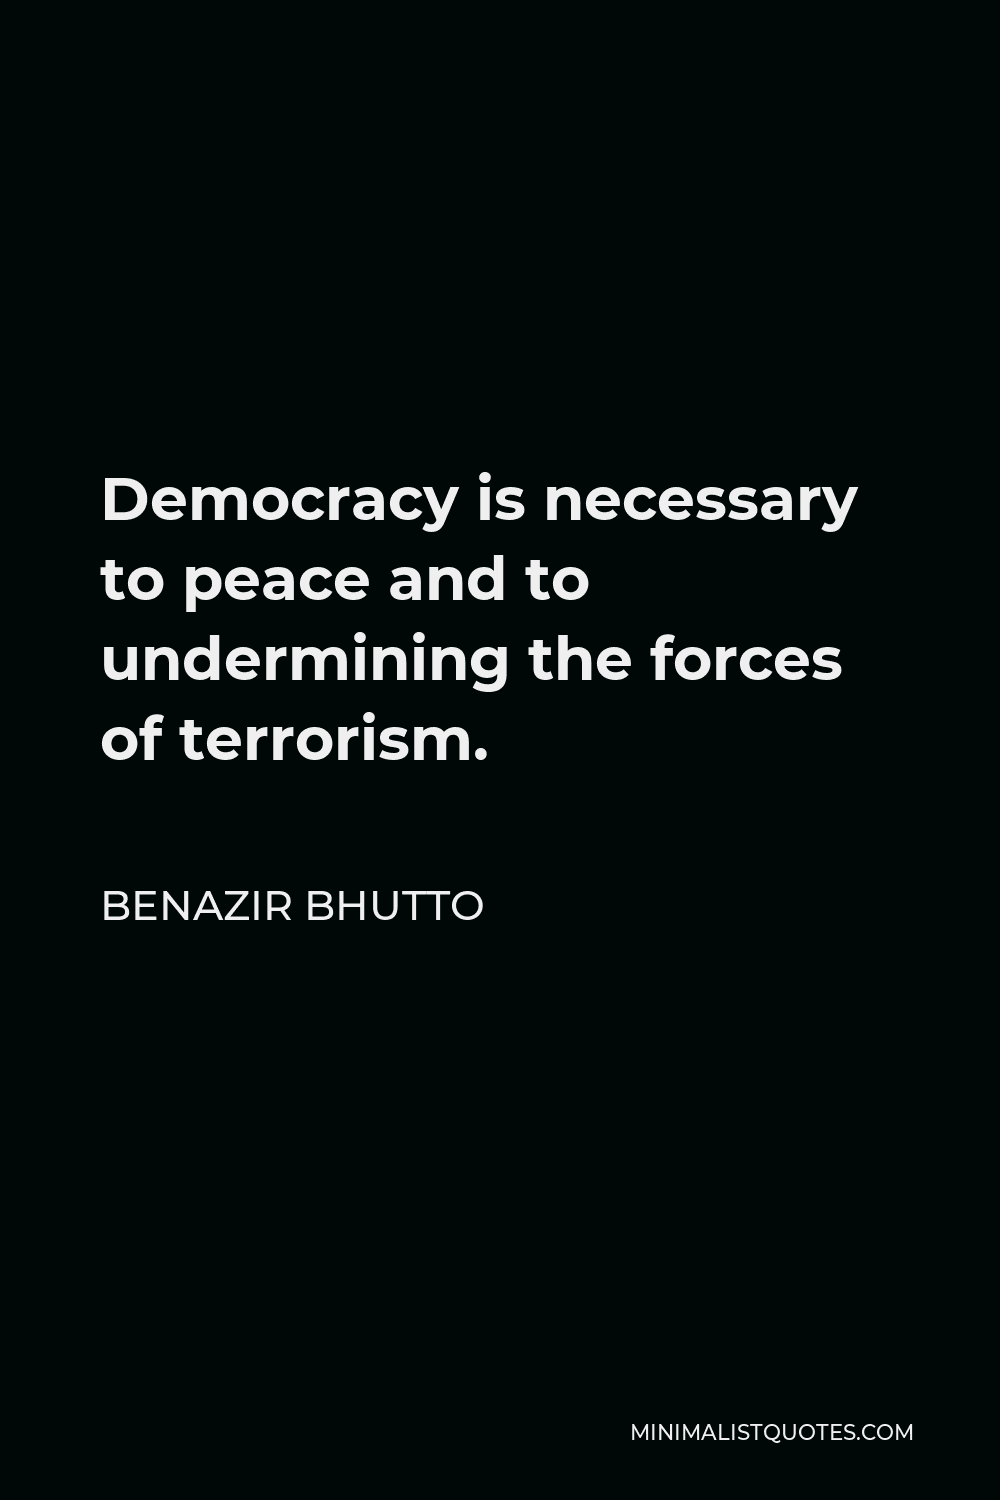 Benazir Bhutto Quote - Democracy is necessary to peace and to undermining the forces of terrorism.